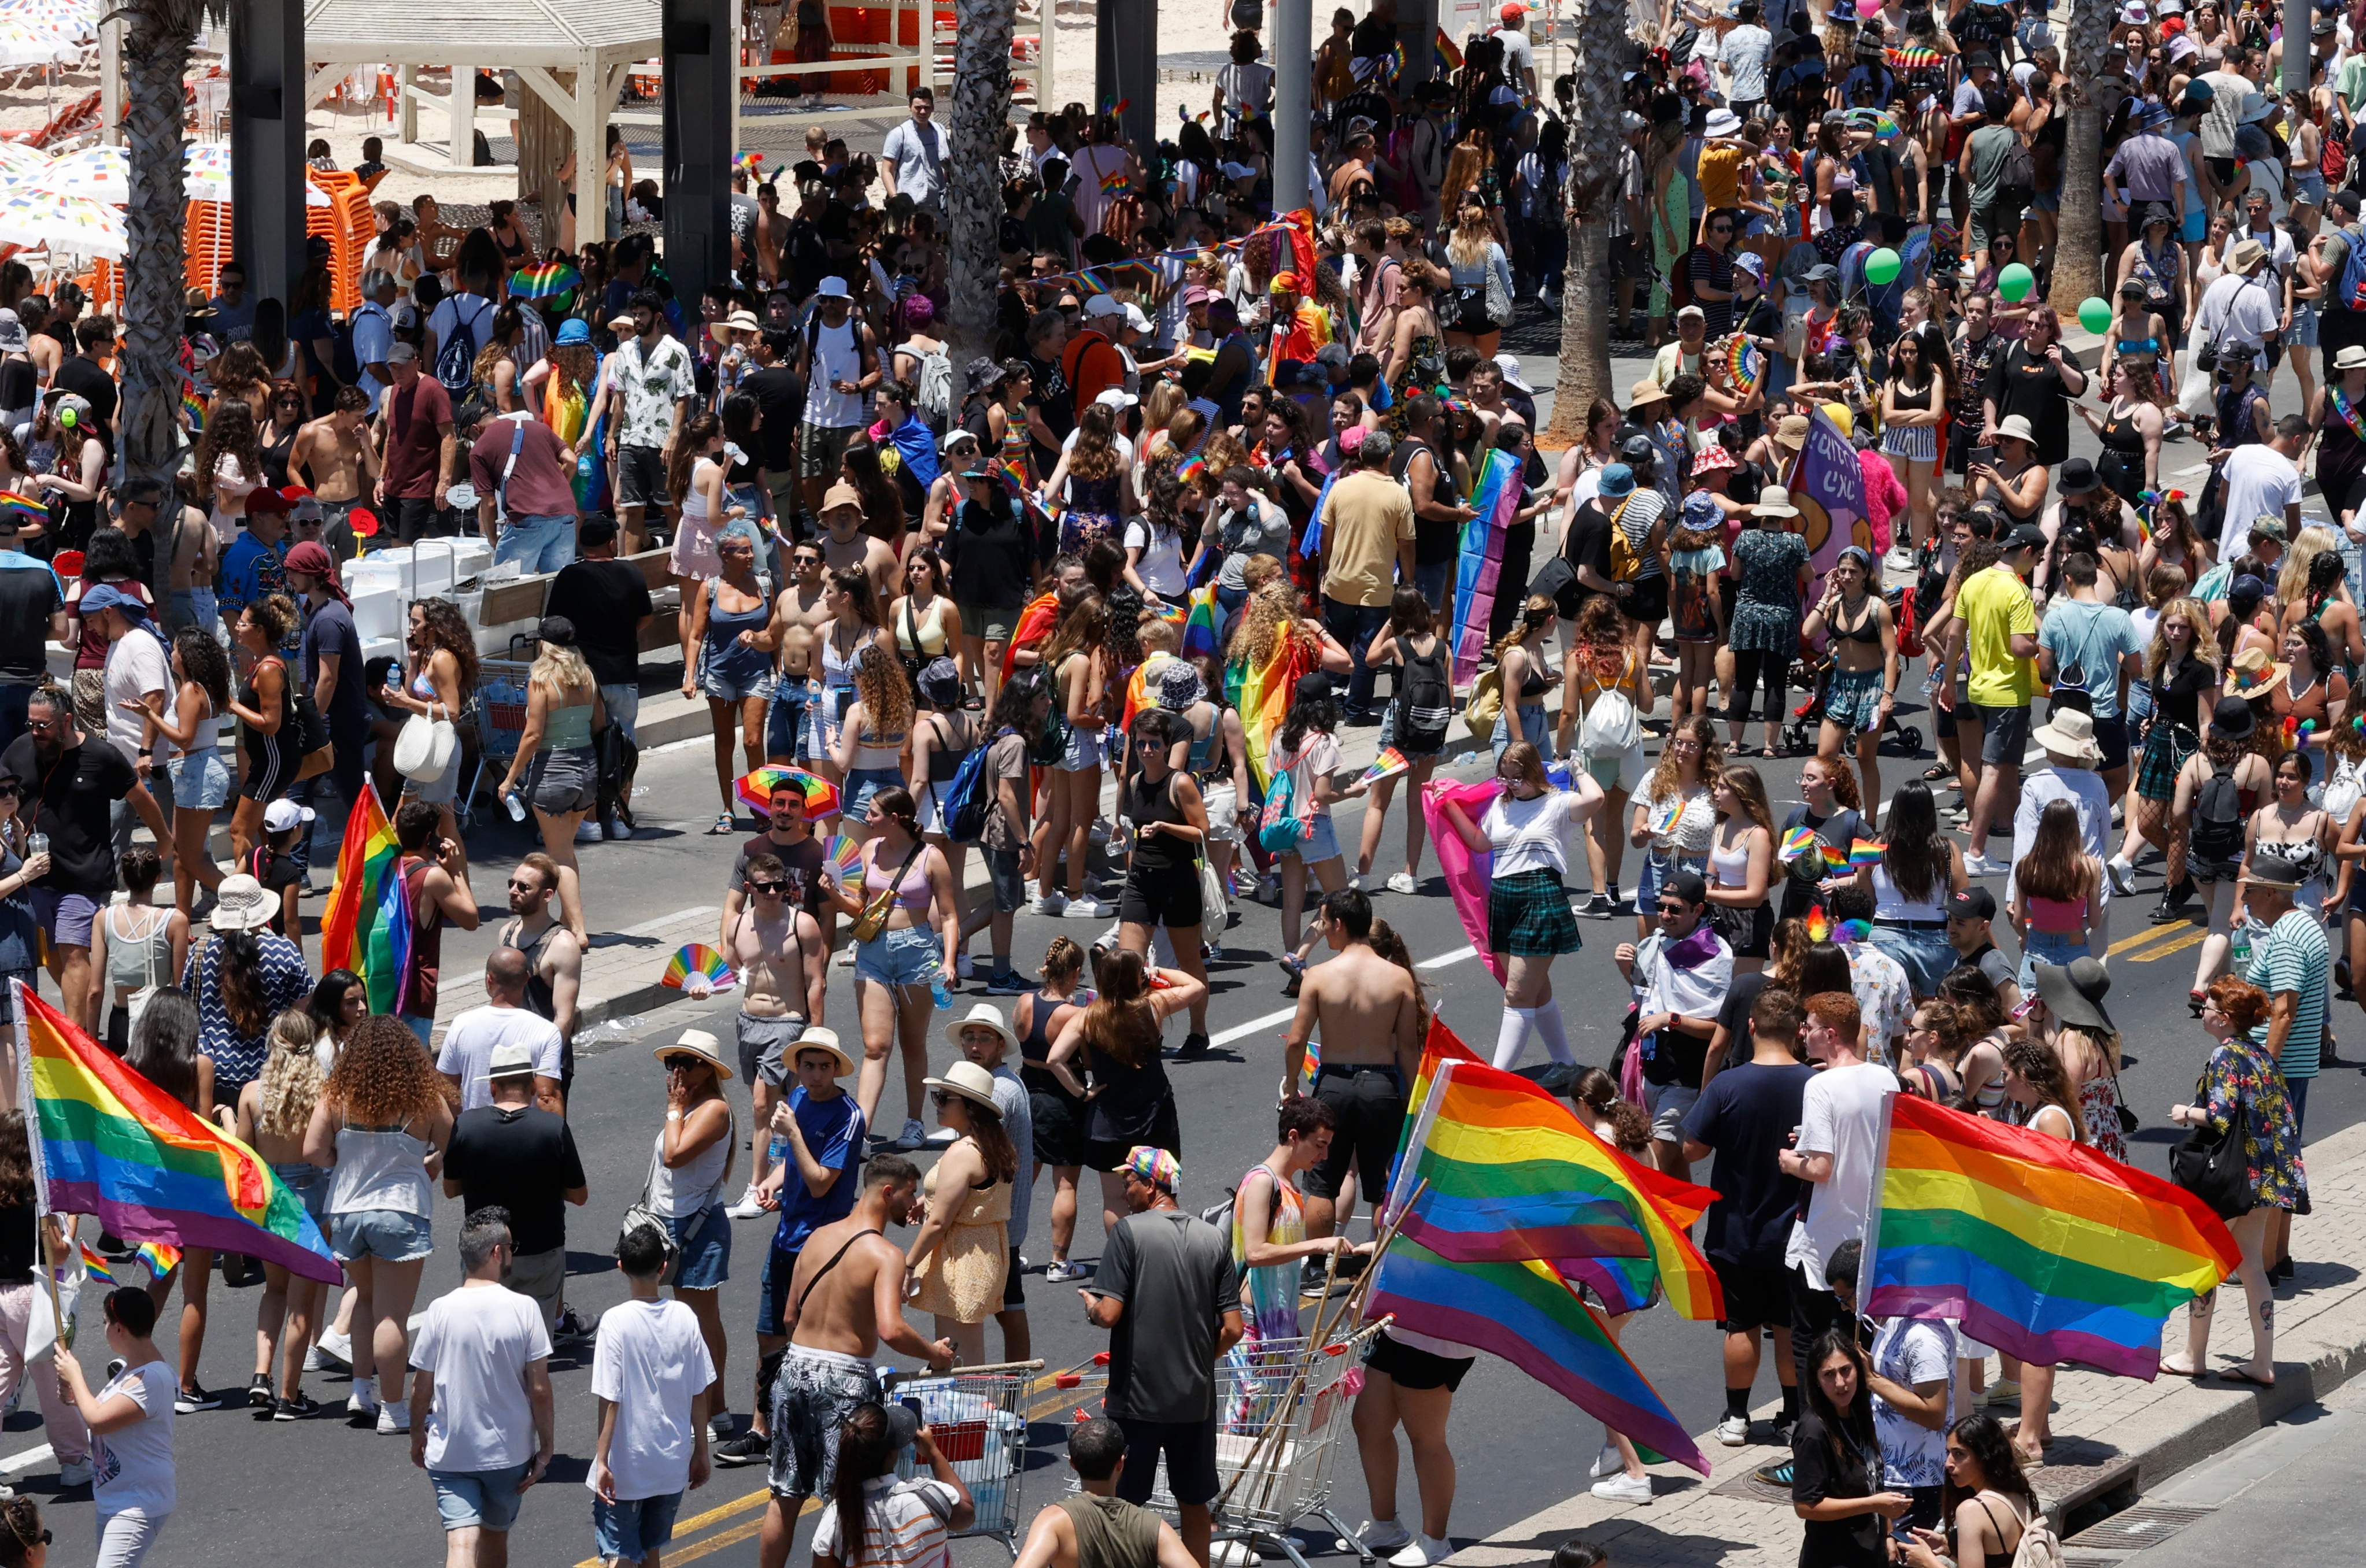 Tel Aviv pride in August: Iranian hackers have been accused of releasing details about Israel’s LGBTQ+ community